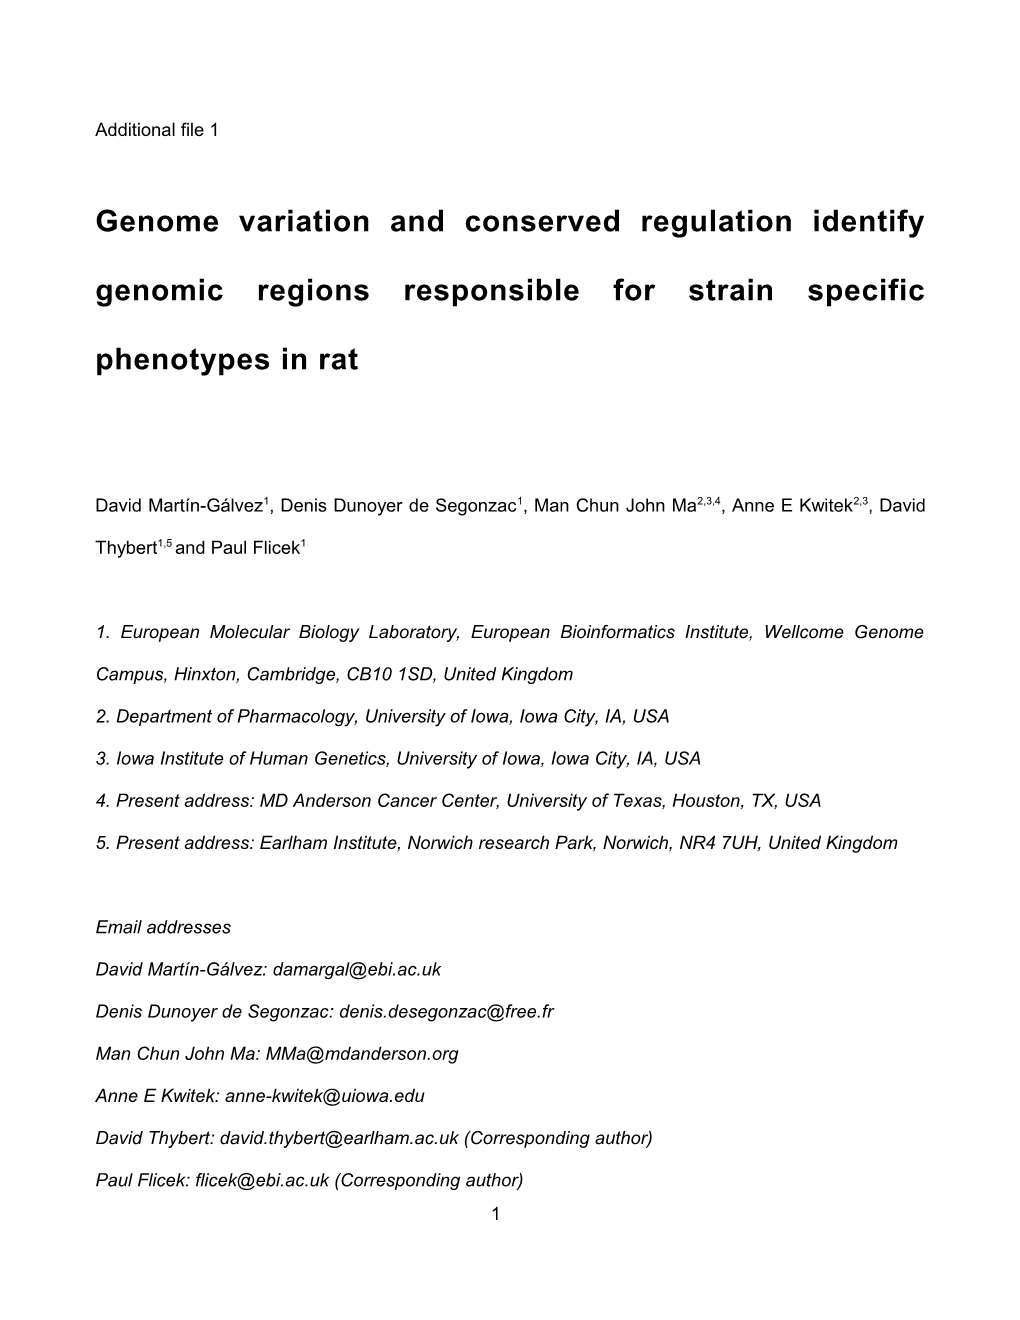 Genome Variation and Conserved Regulation Identify Genomic Regions Responsible for Strain